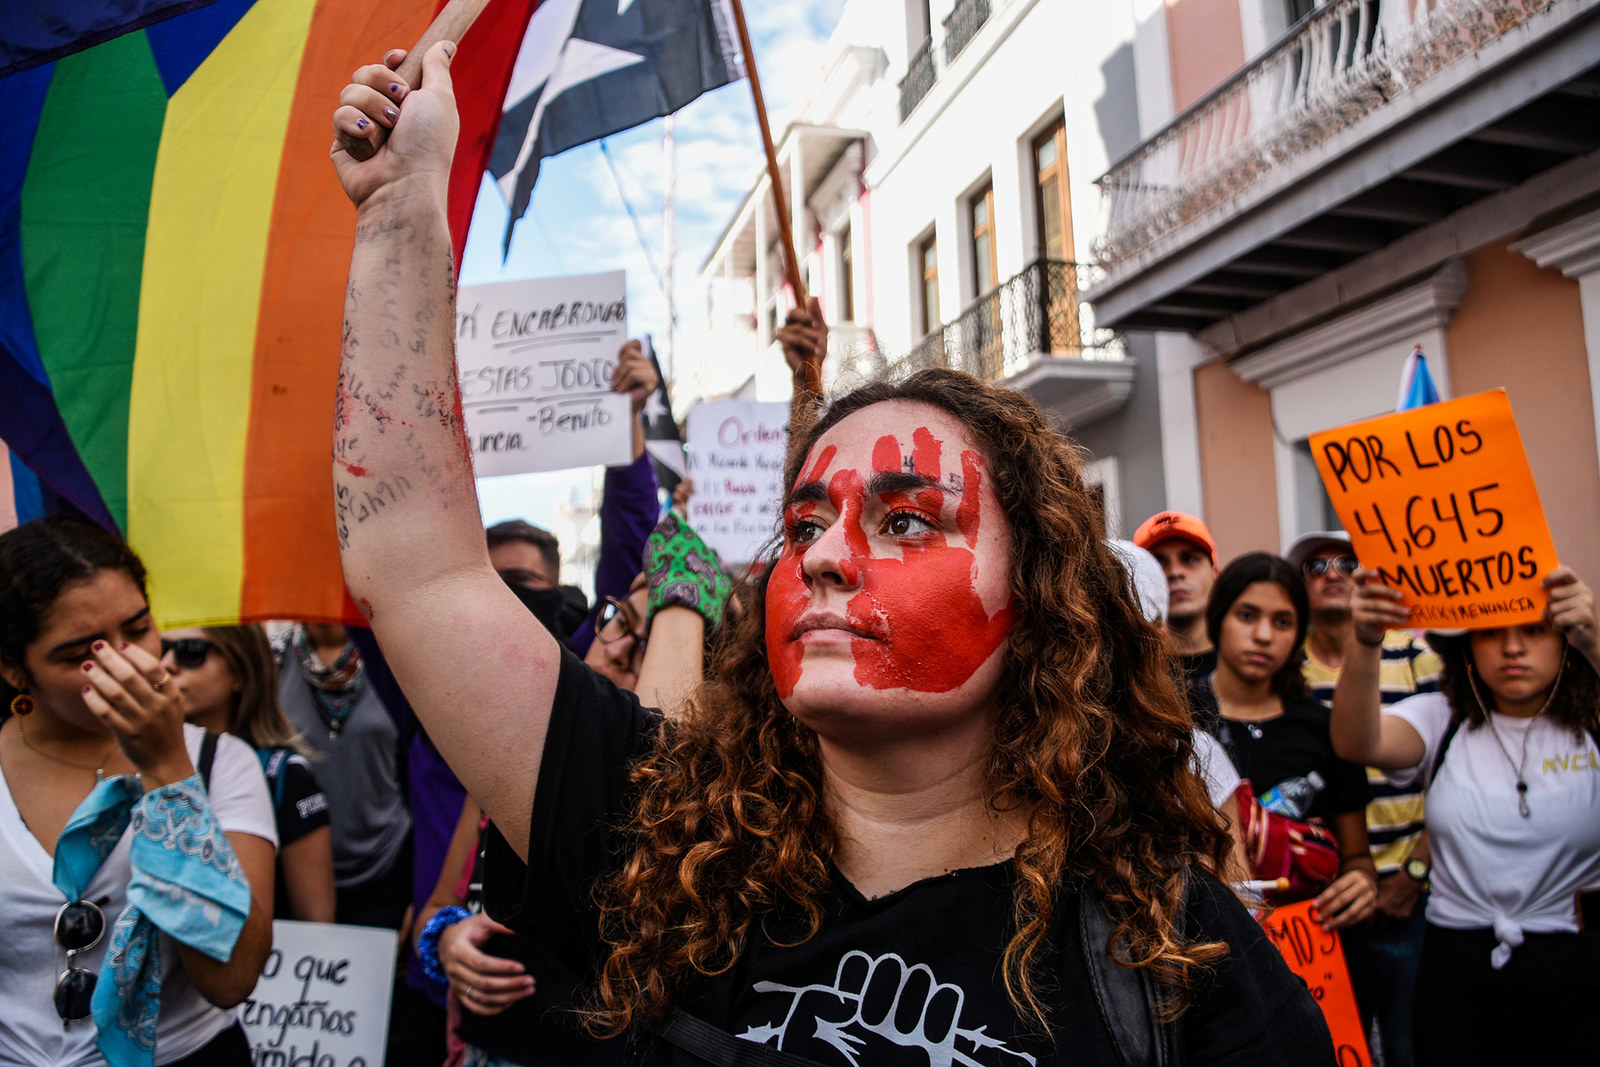 Puerto Rico knows how to stage a protest (photos) - Democratic Underground